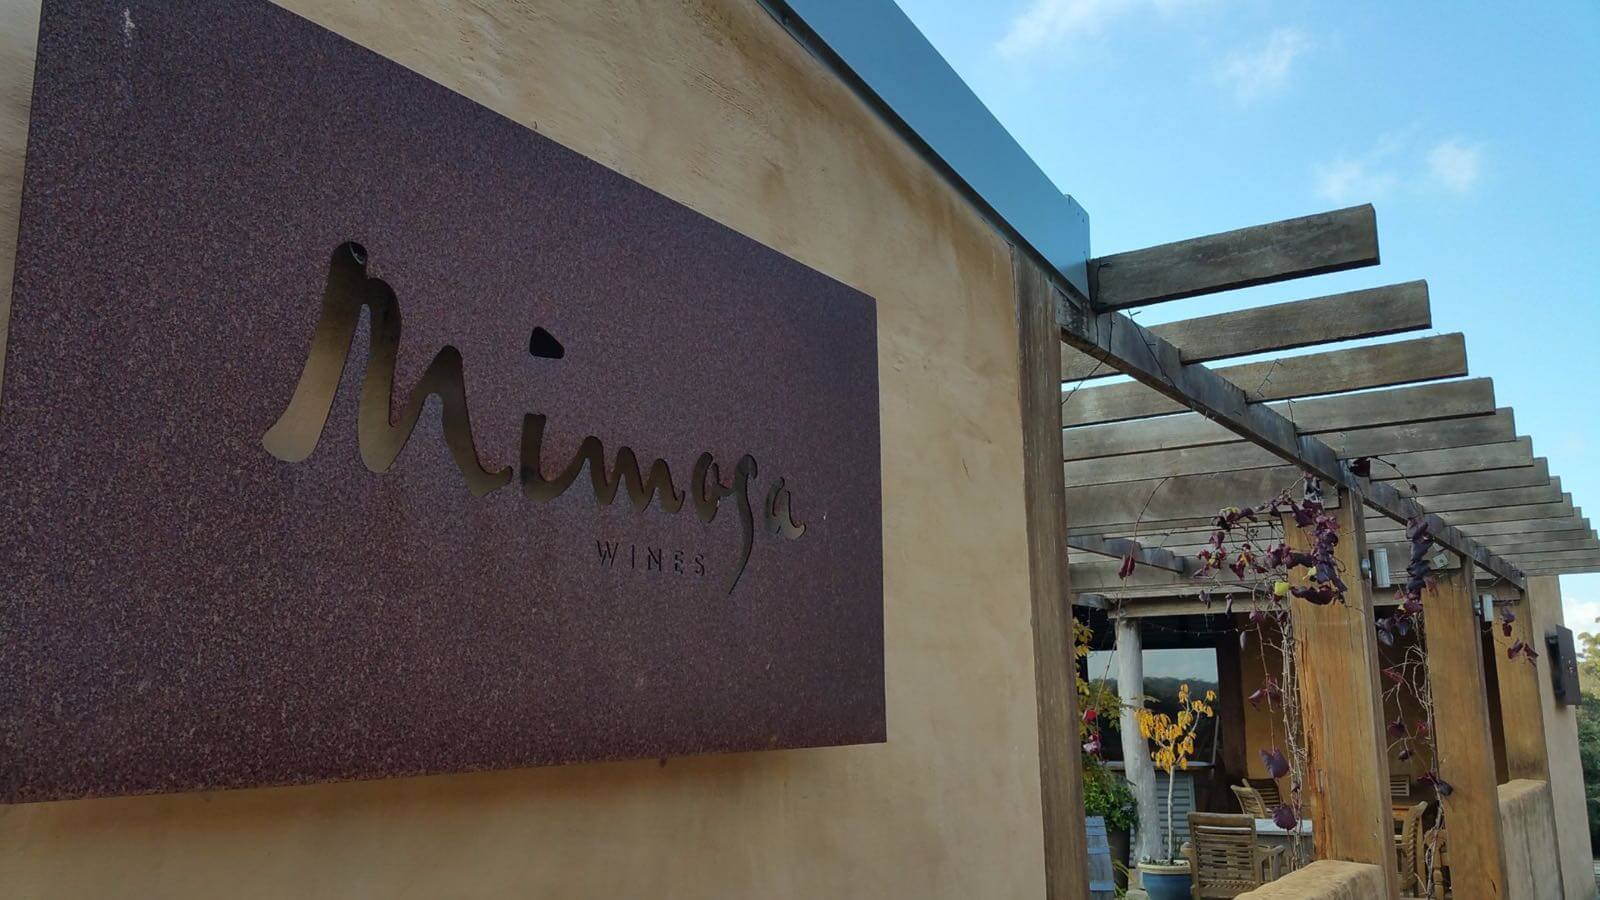 Mimosa restuarant and Winery